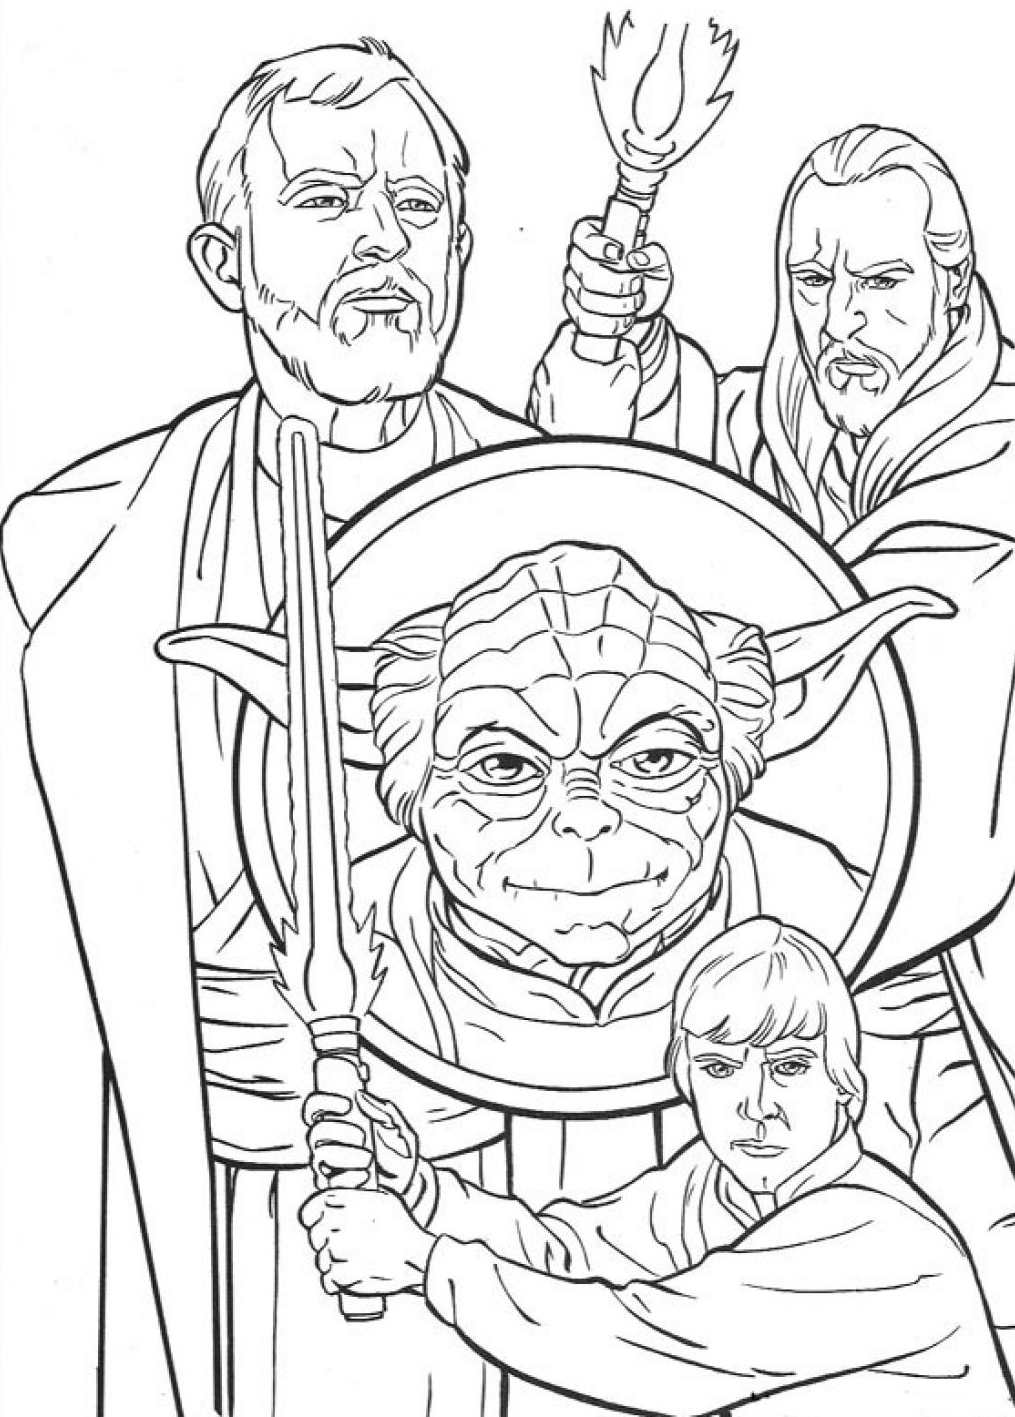 Luke Skywalker Coloring Pages - Best Coloring Pages For Kids